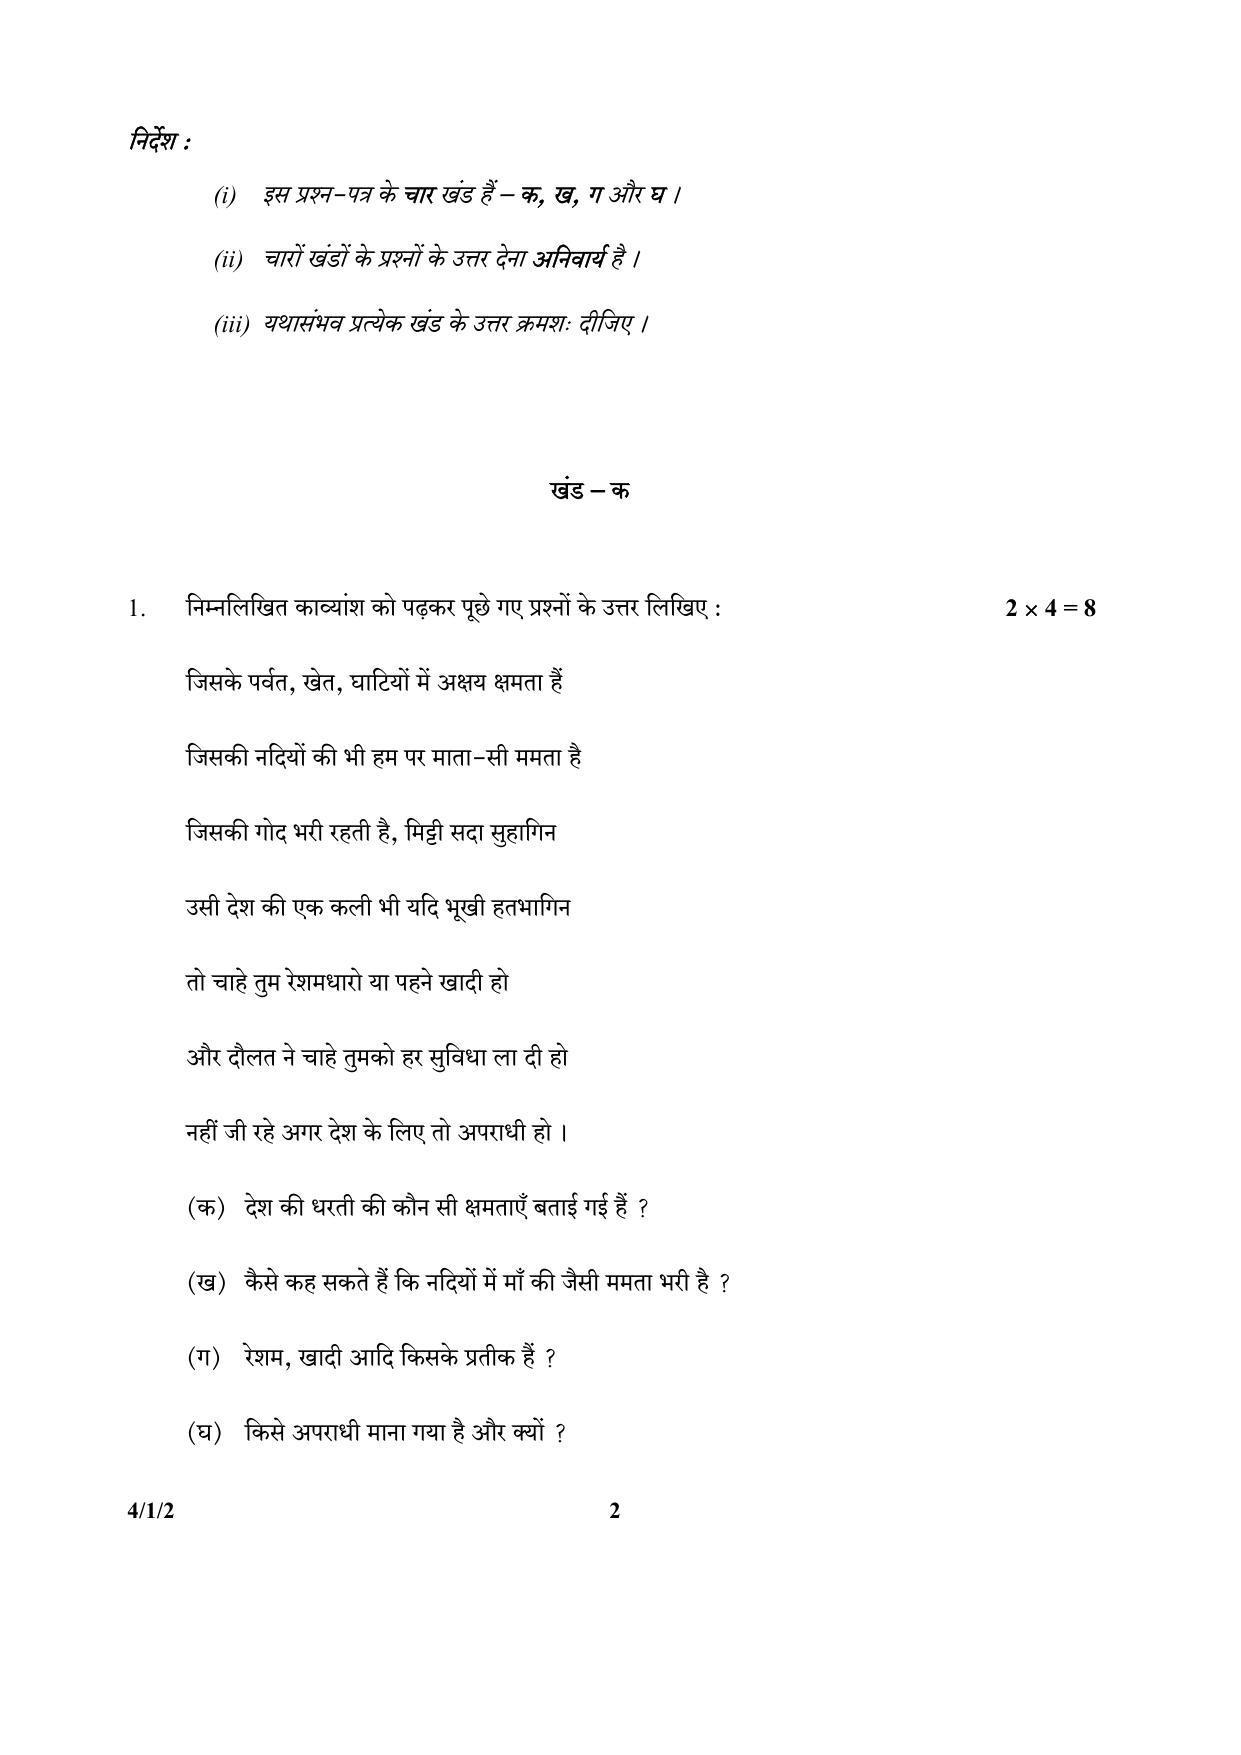 CBSE Class 10 4-1-2_Hindi 2017-comptt Question Paper - Page 2